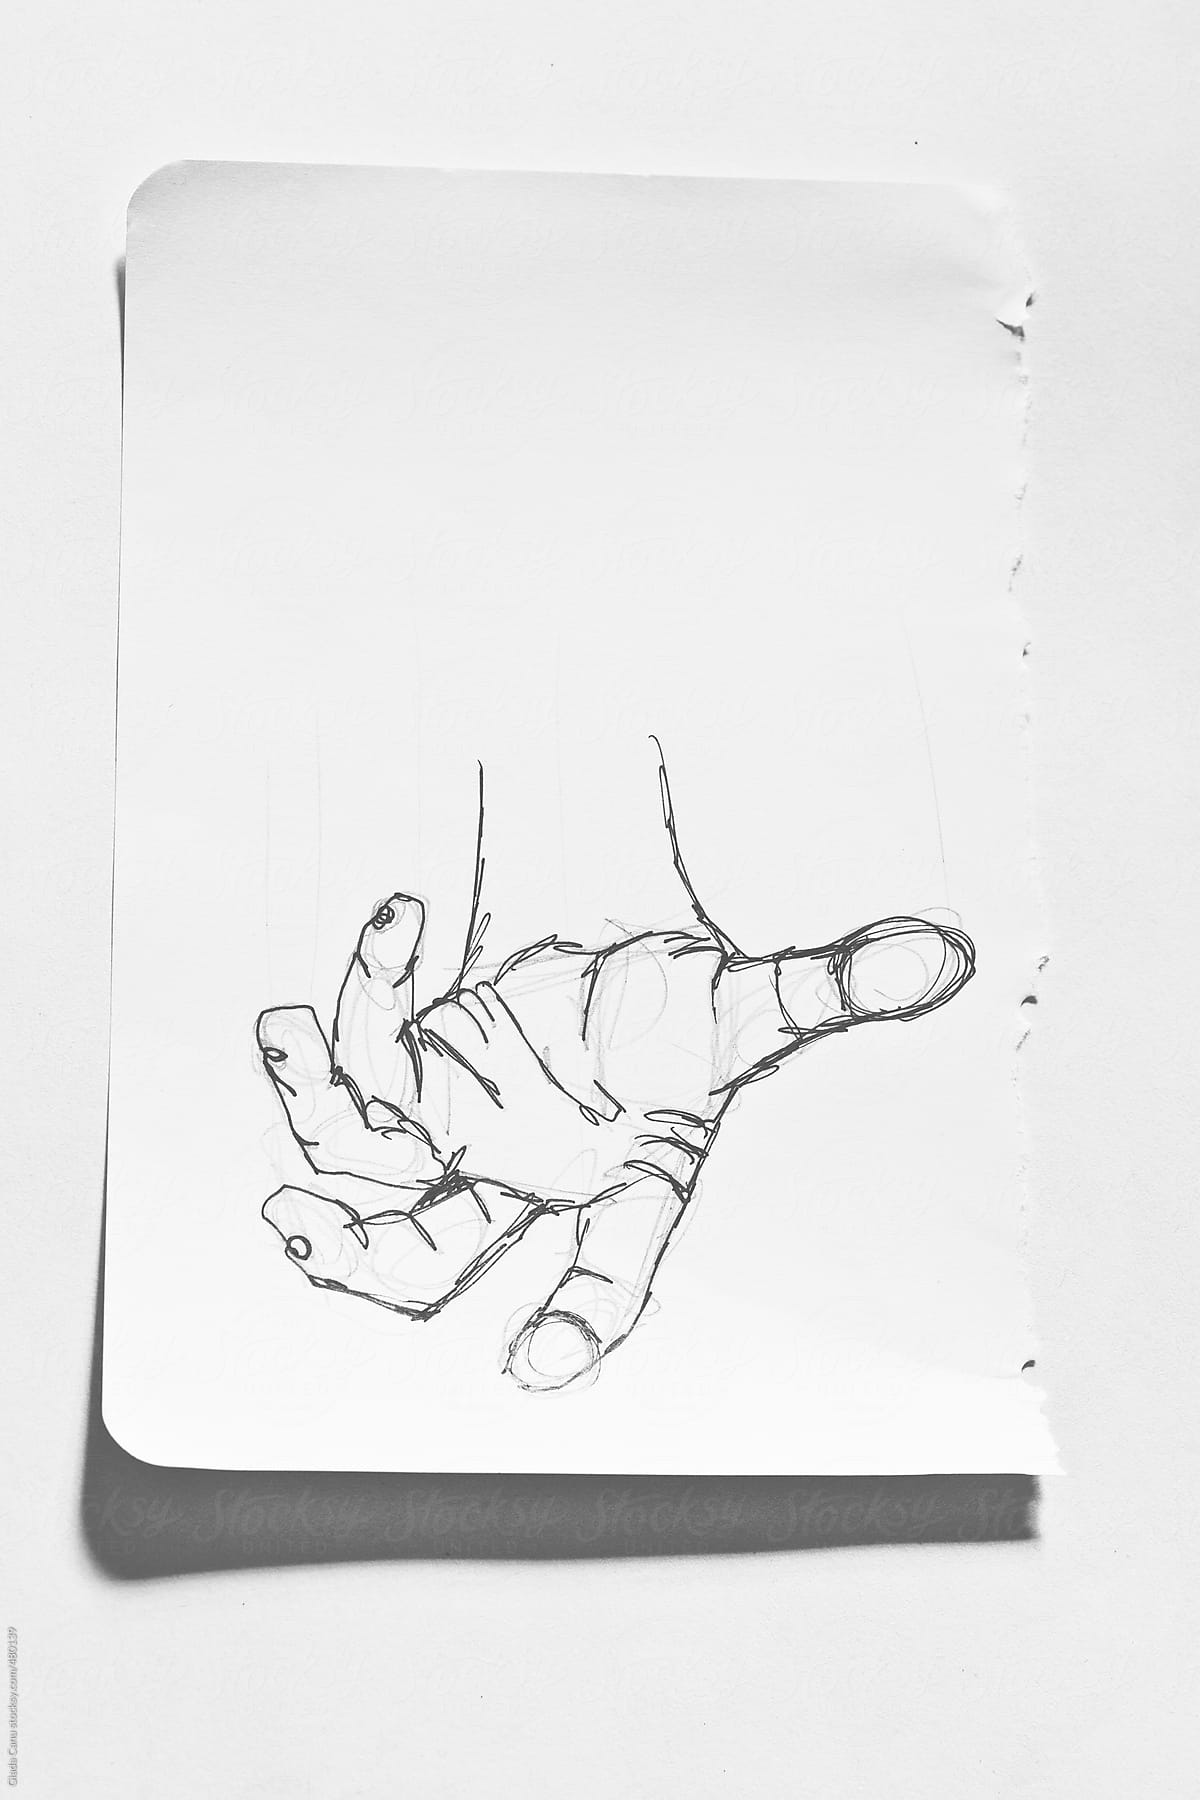 Sketch of a hand